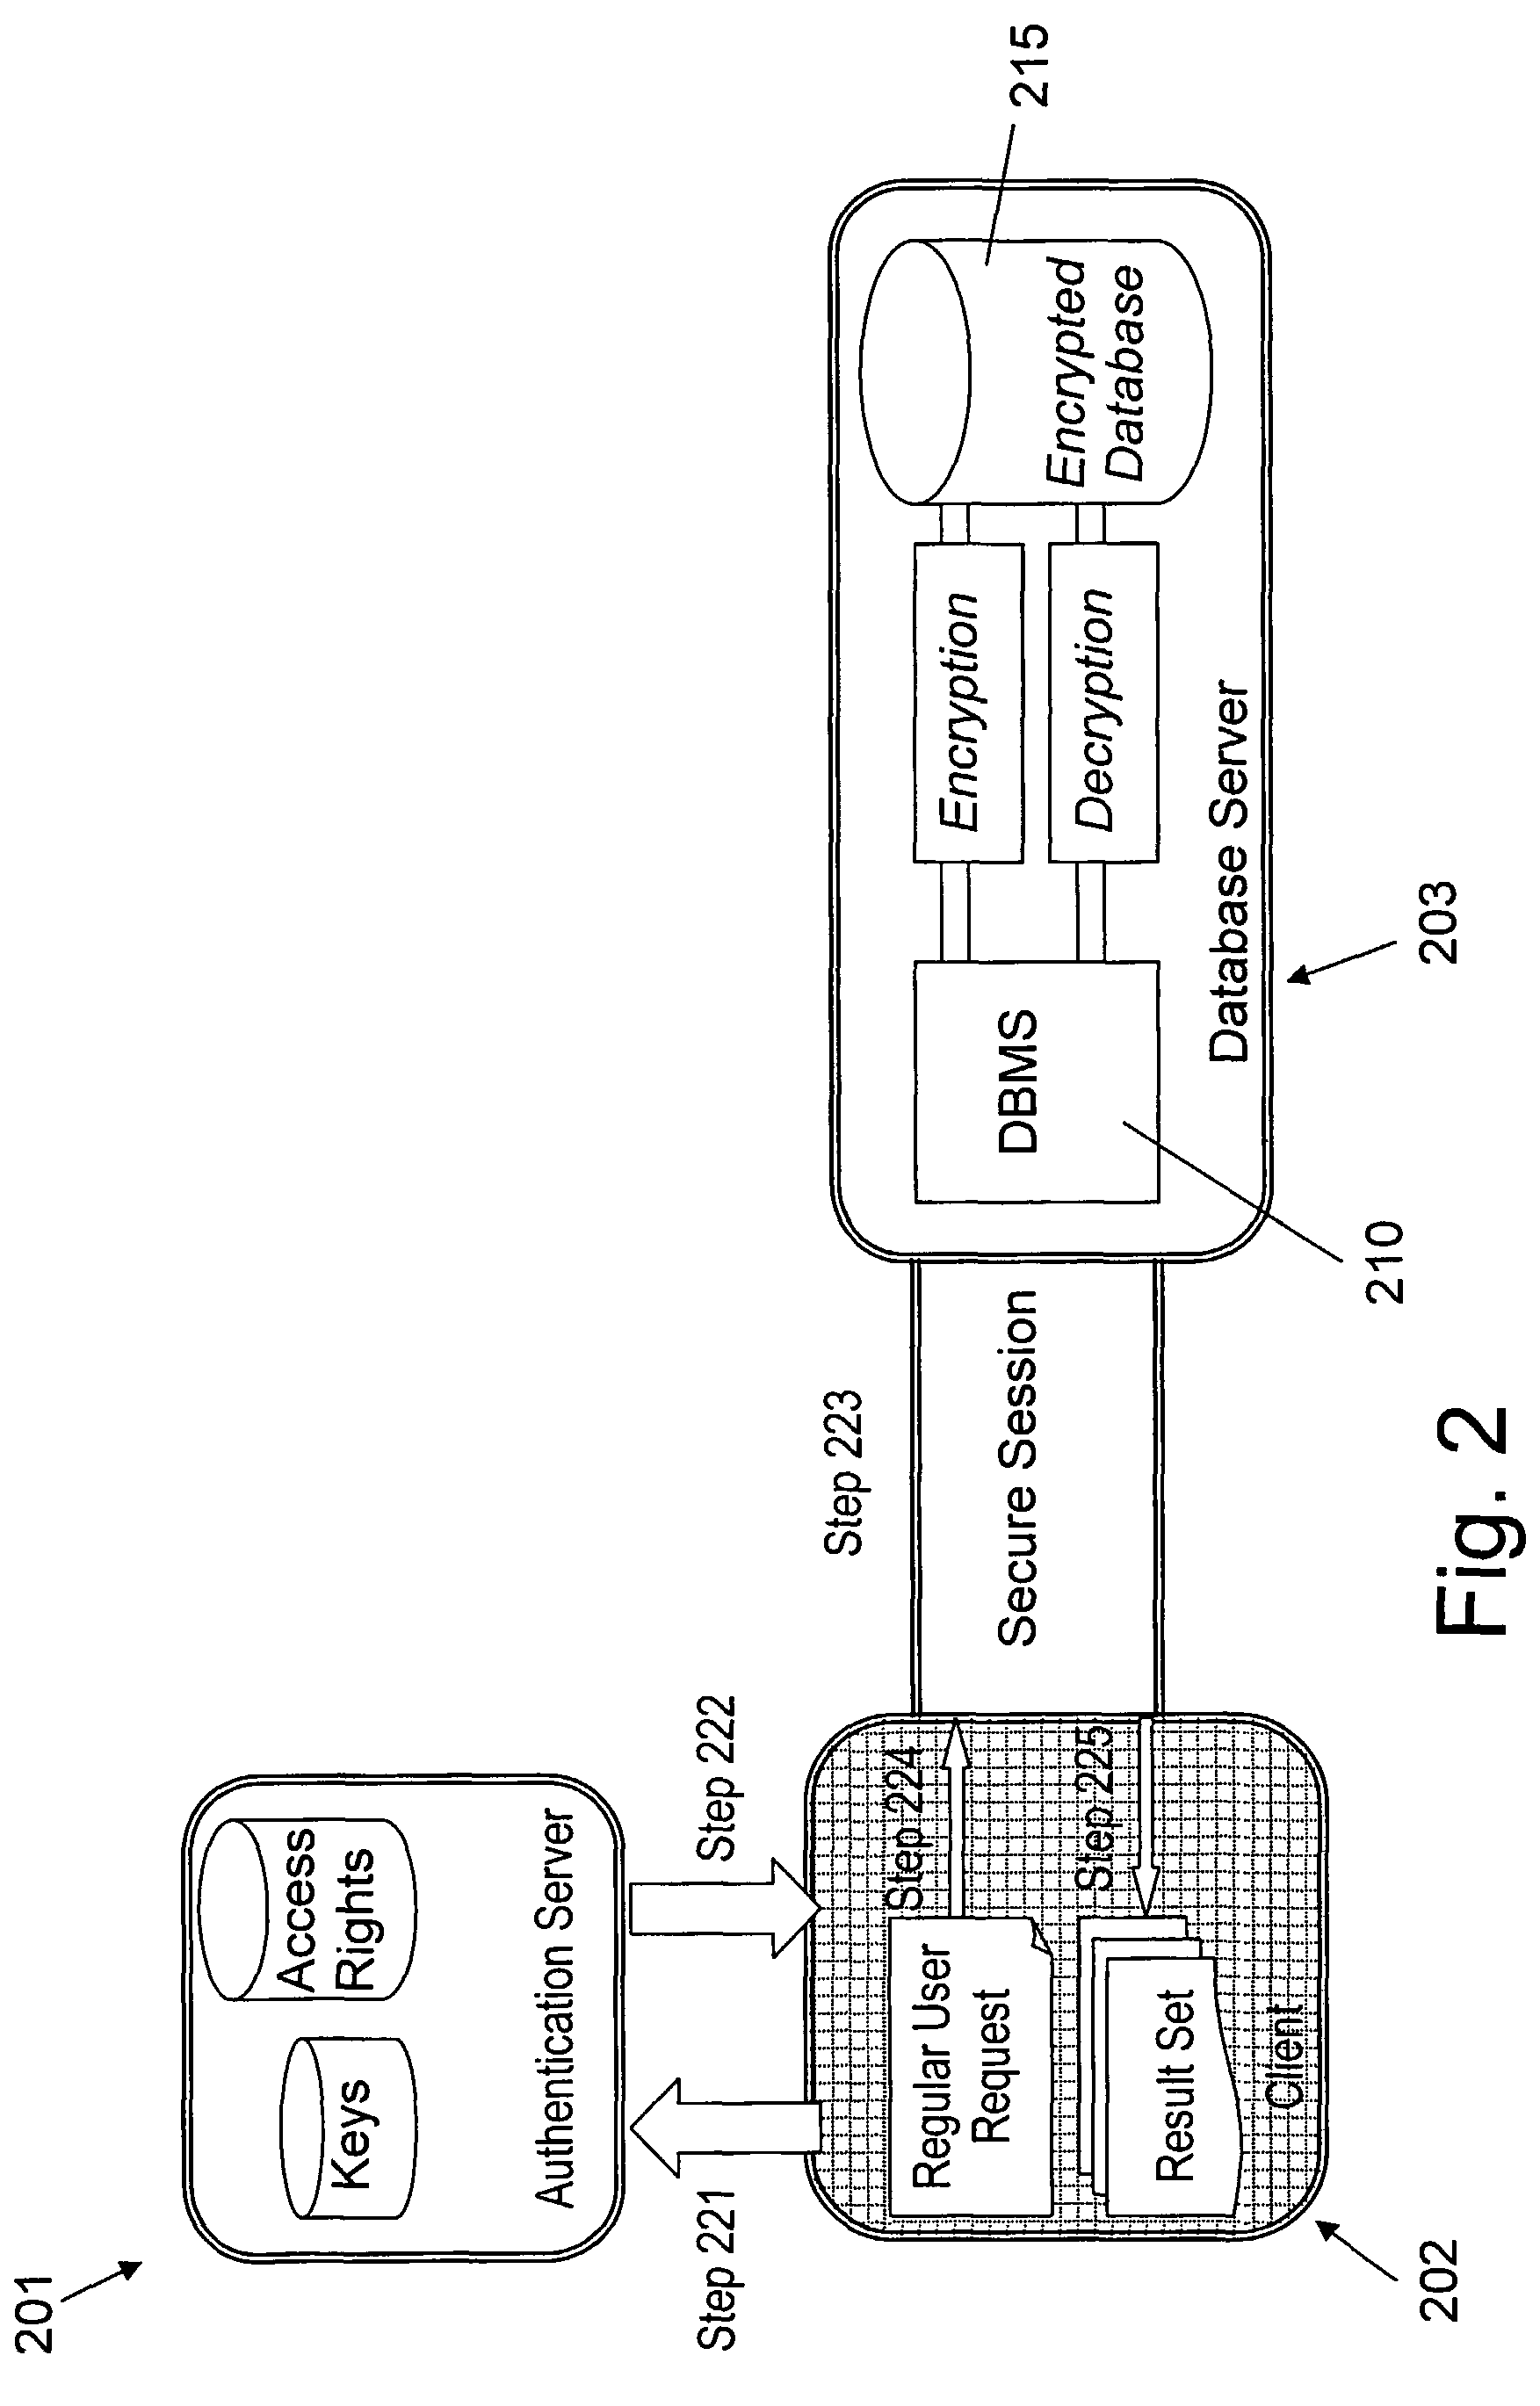 Structure preserving database encryption method and system